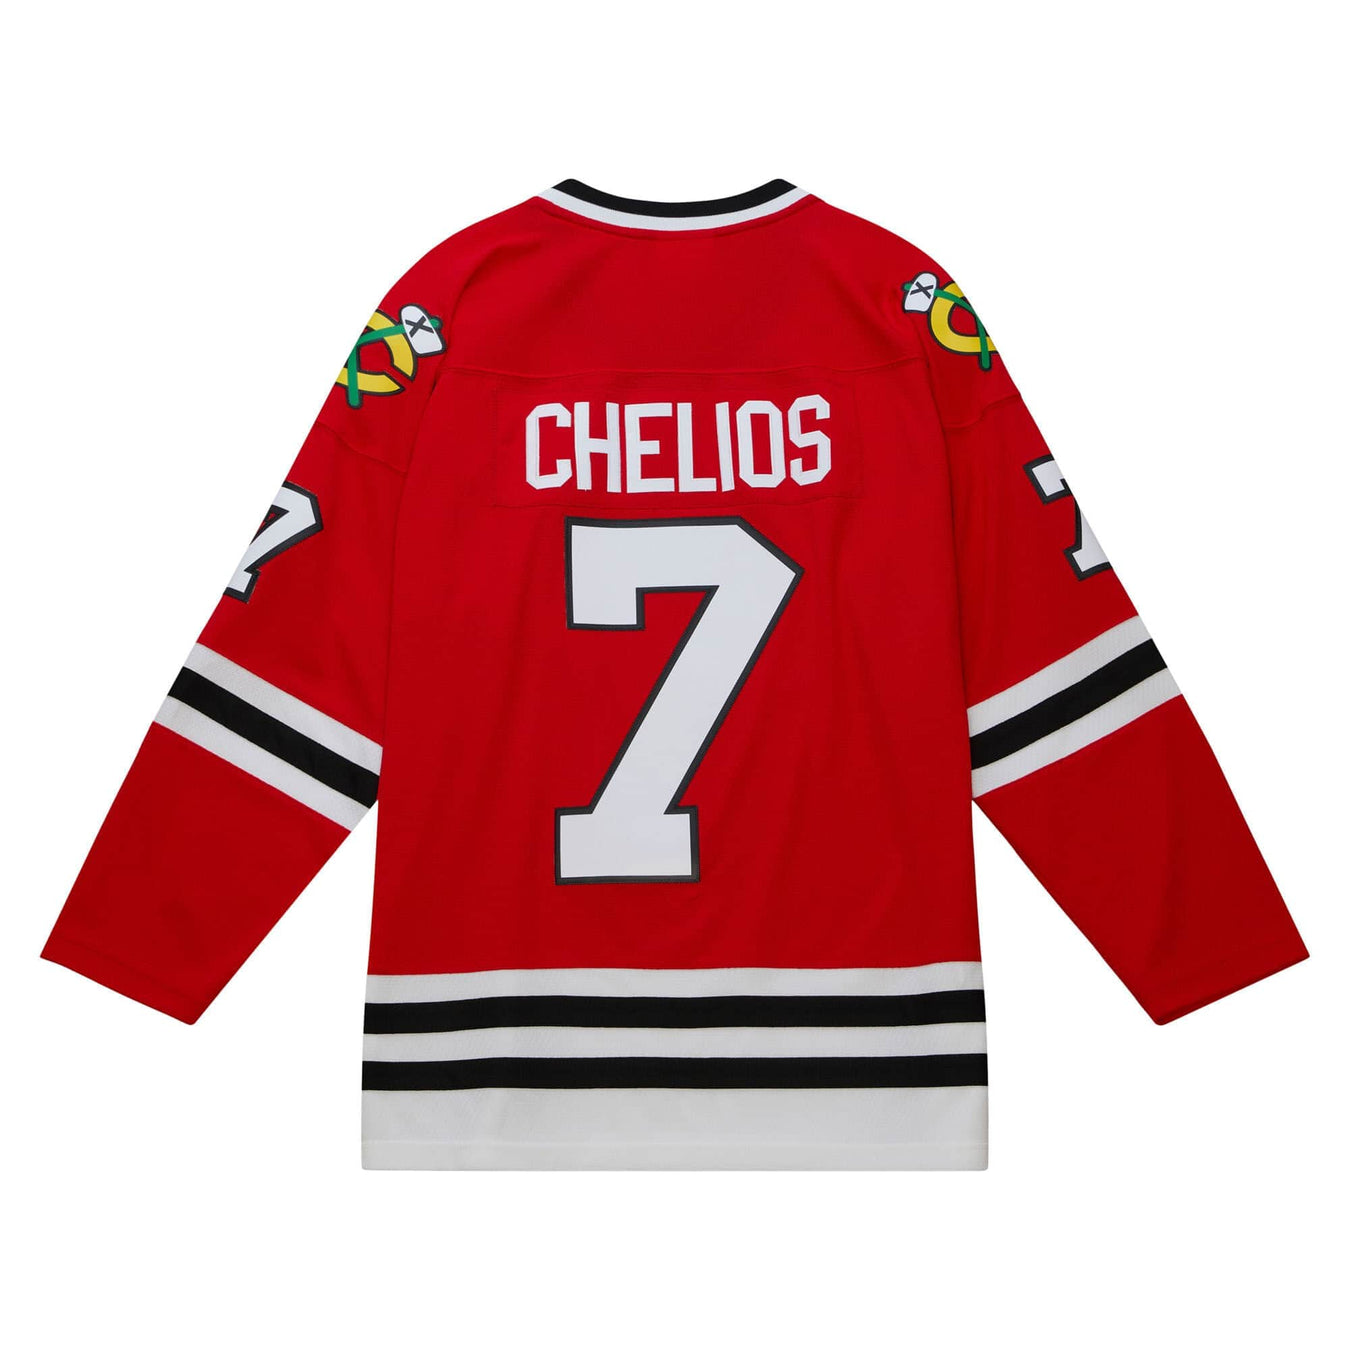 Chris Chelios NHL Jerseys, Apparel and Collectibles